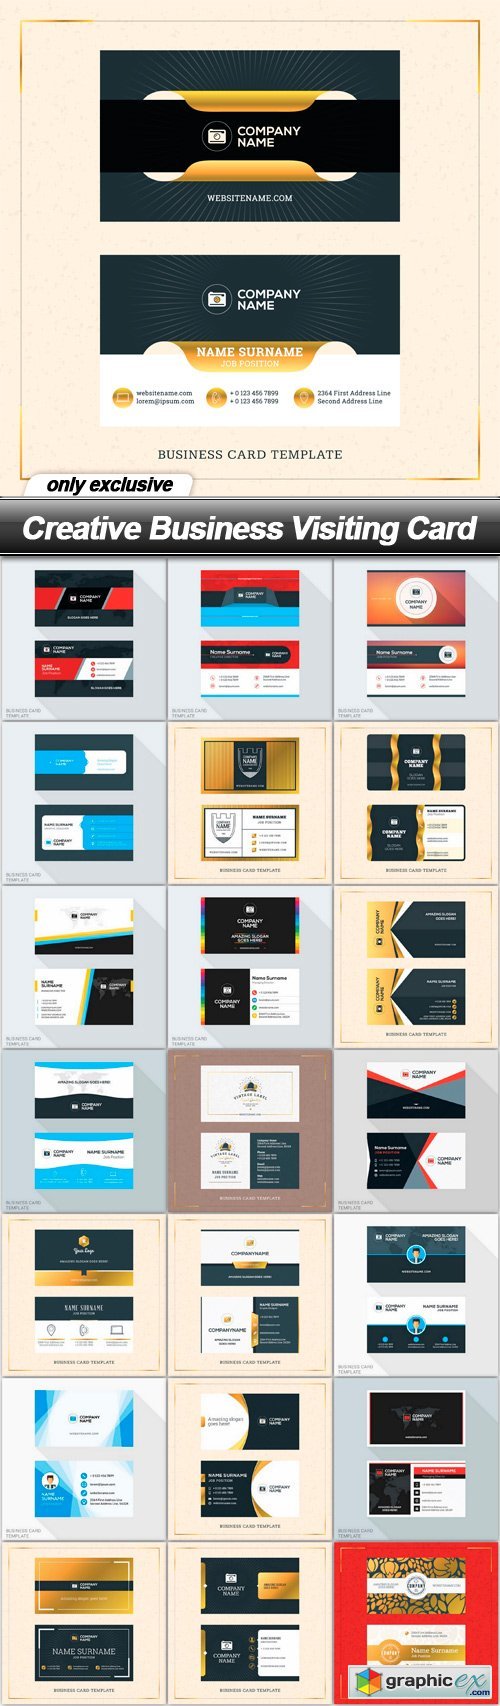 Creative Business Visiting Card - 22 EPS